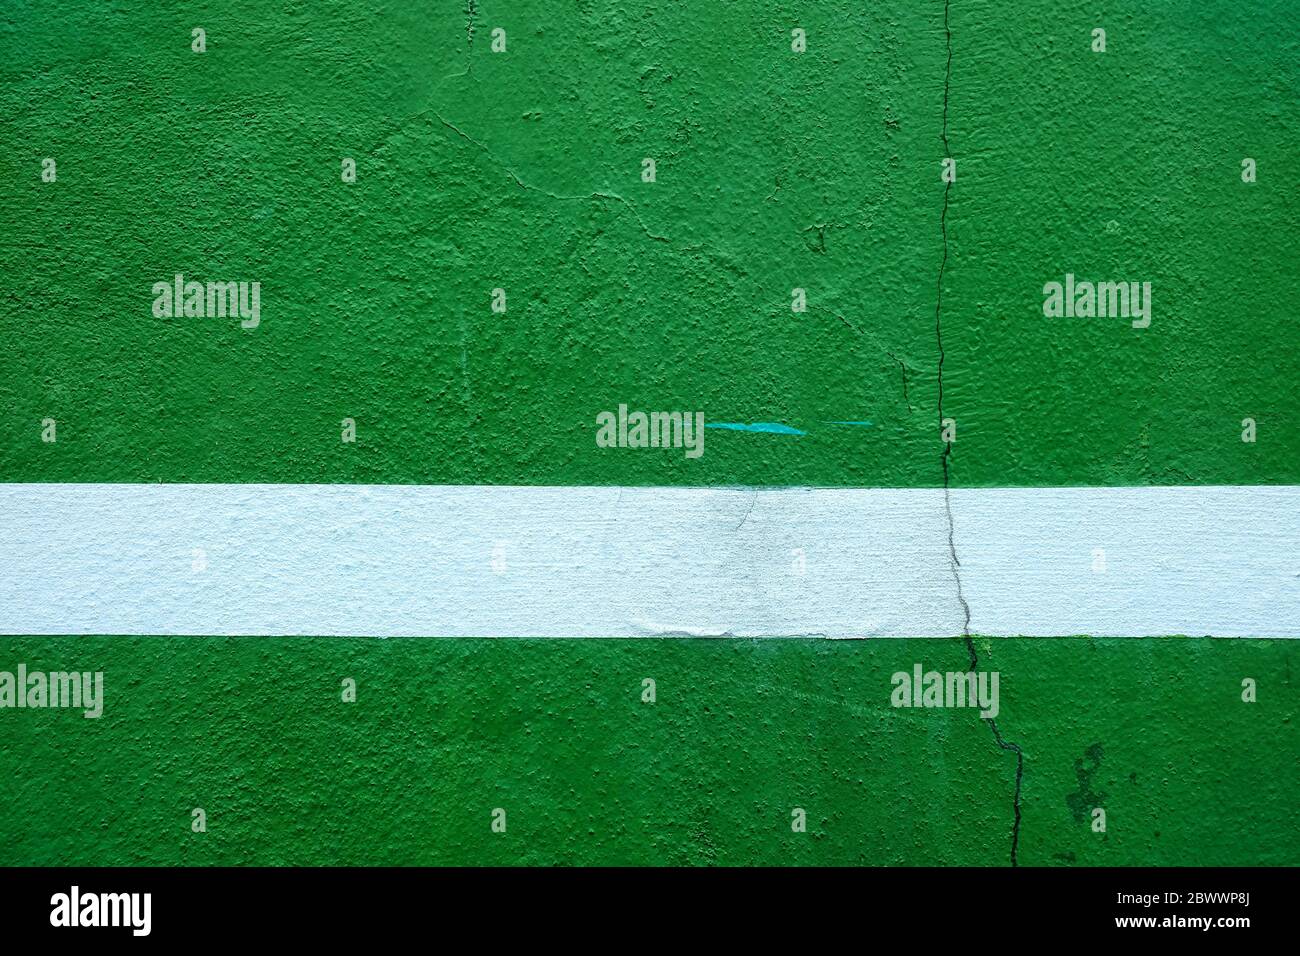 White Line on Green Painting on Concrete Wall Texture Background. Stock Photo